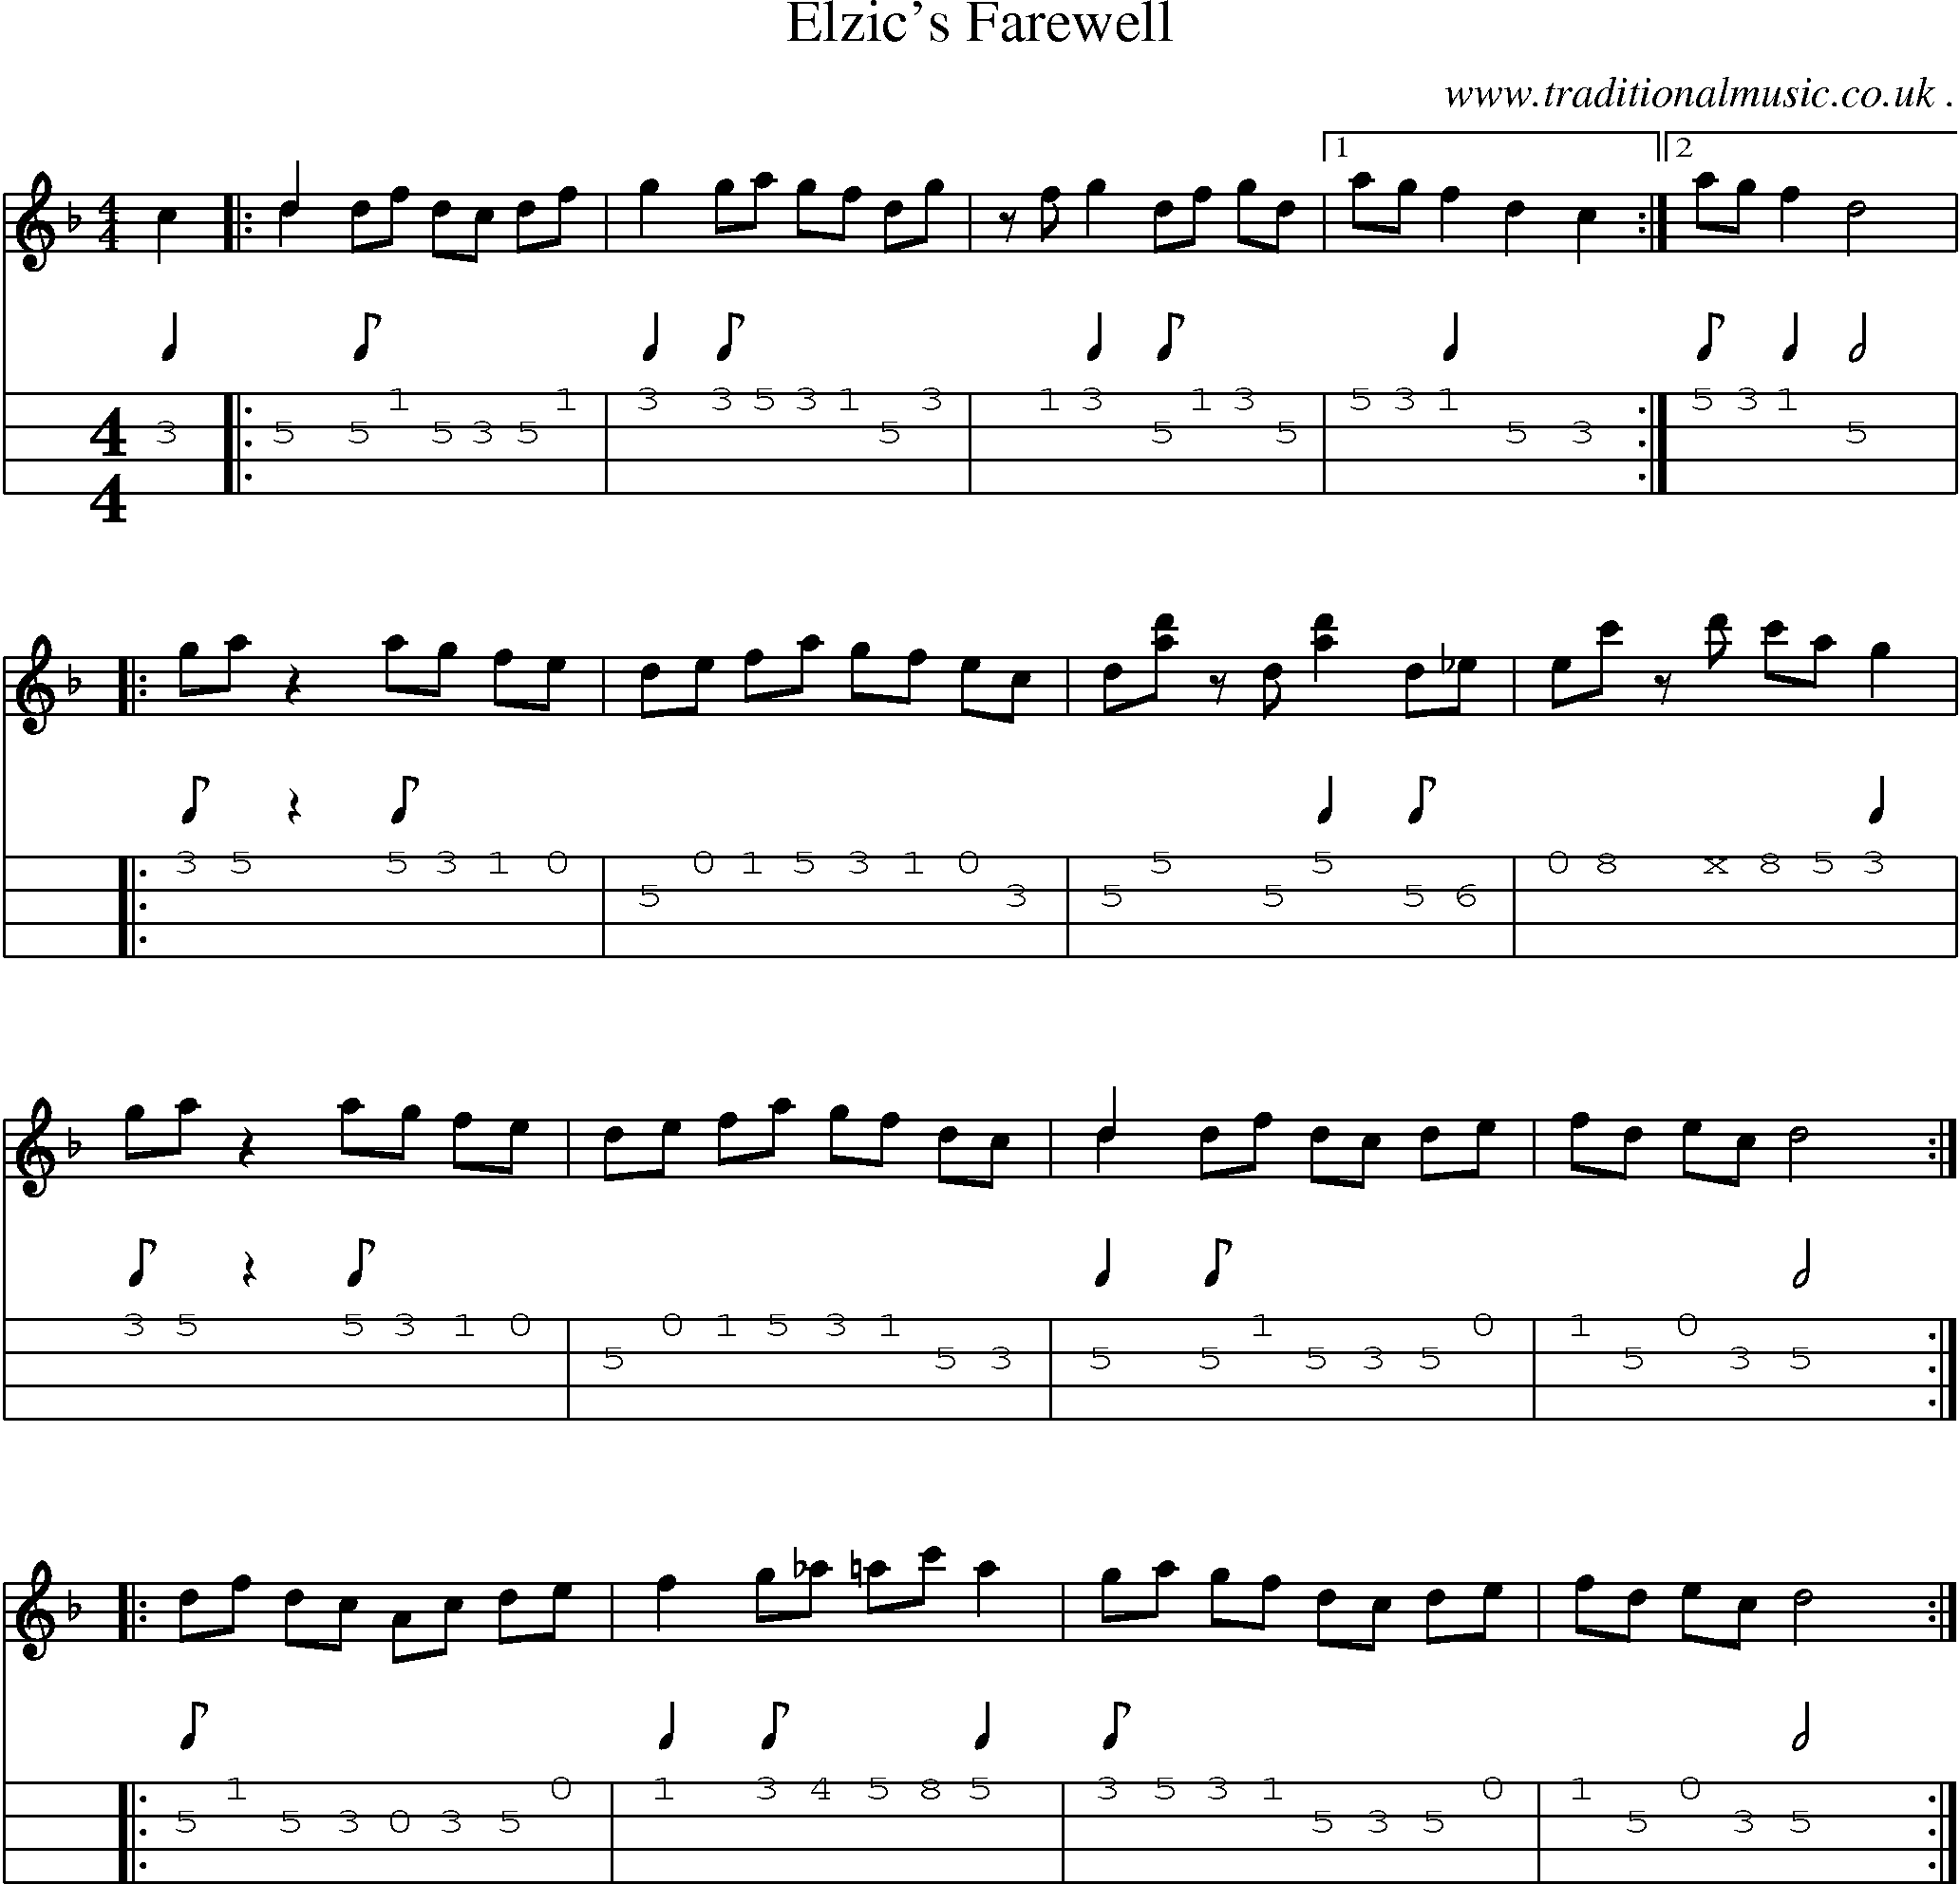 Music Score and Guitar Tabs for Elzics Farewell